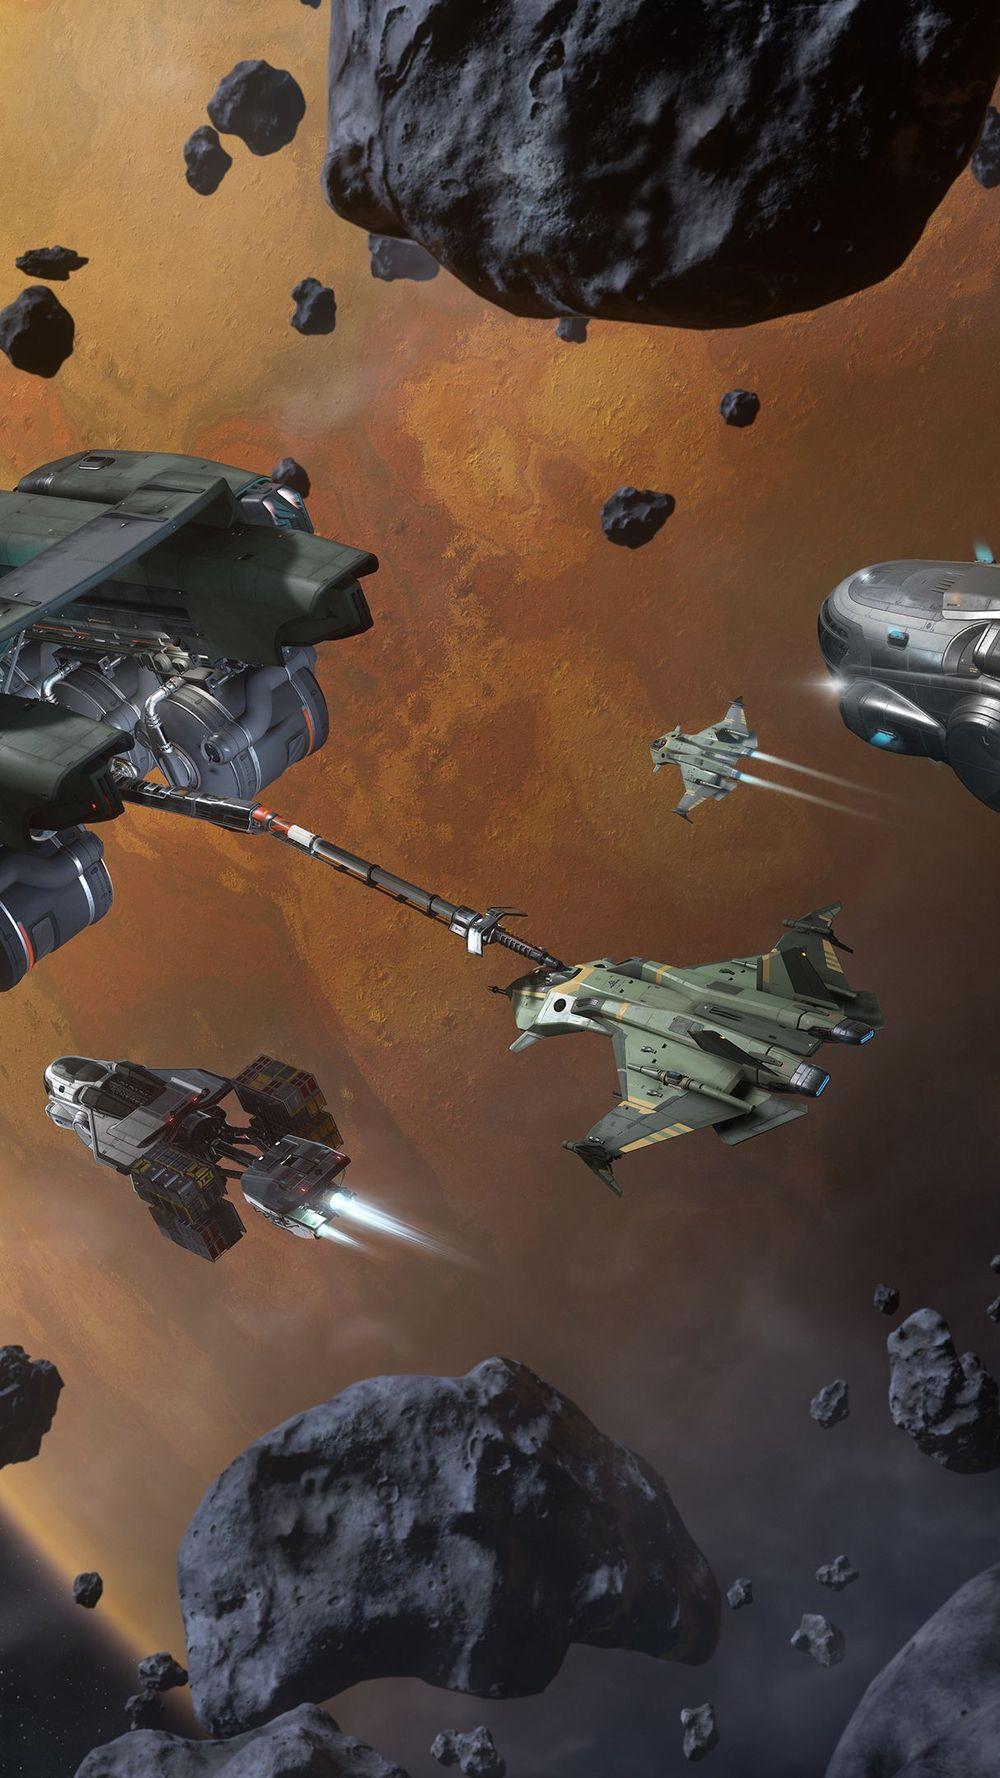 Star Citizen Previews New Ore Refining Ship And Alpha 3.17 Features 